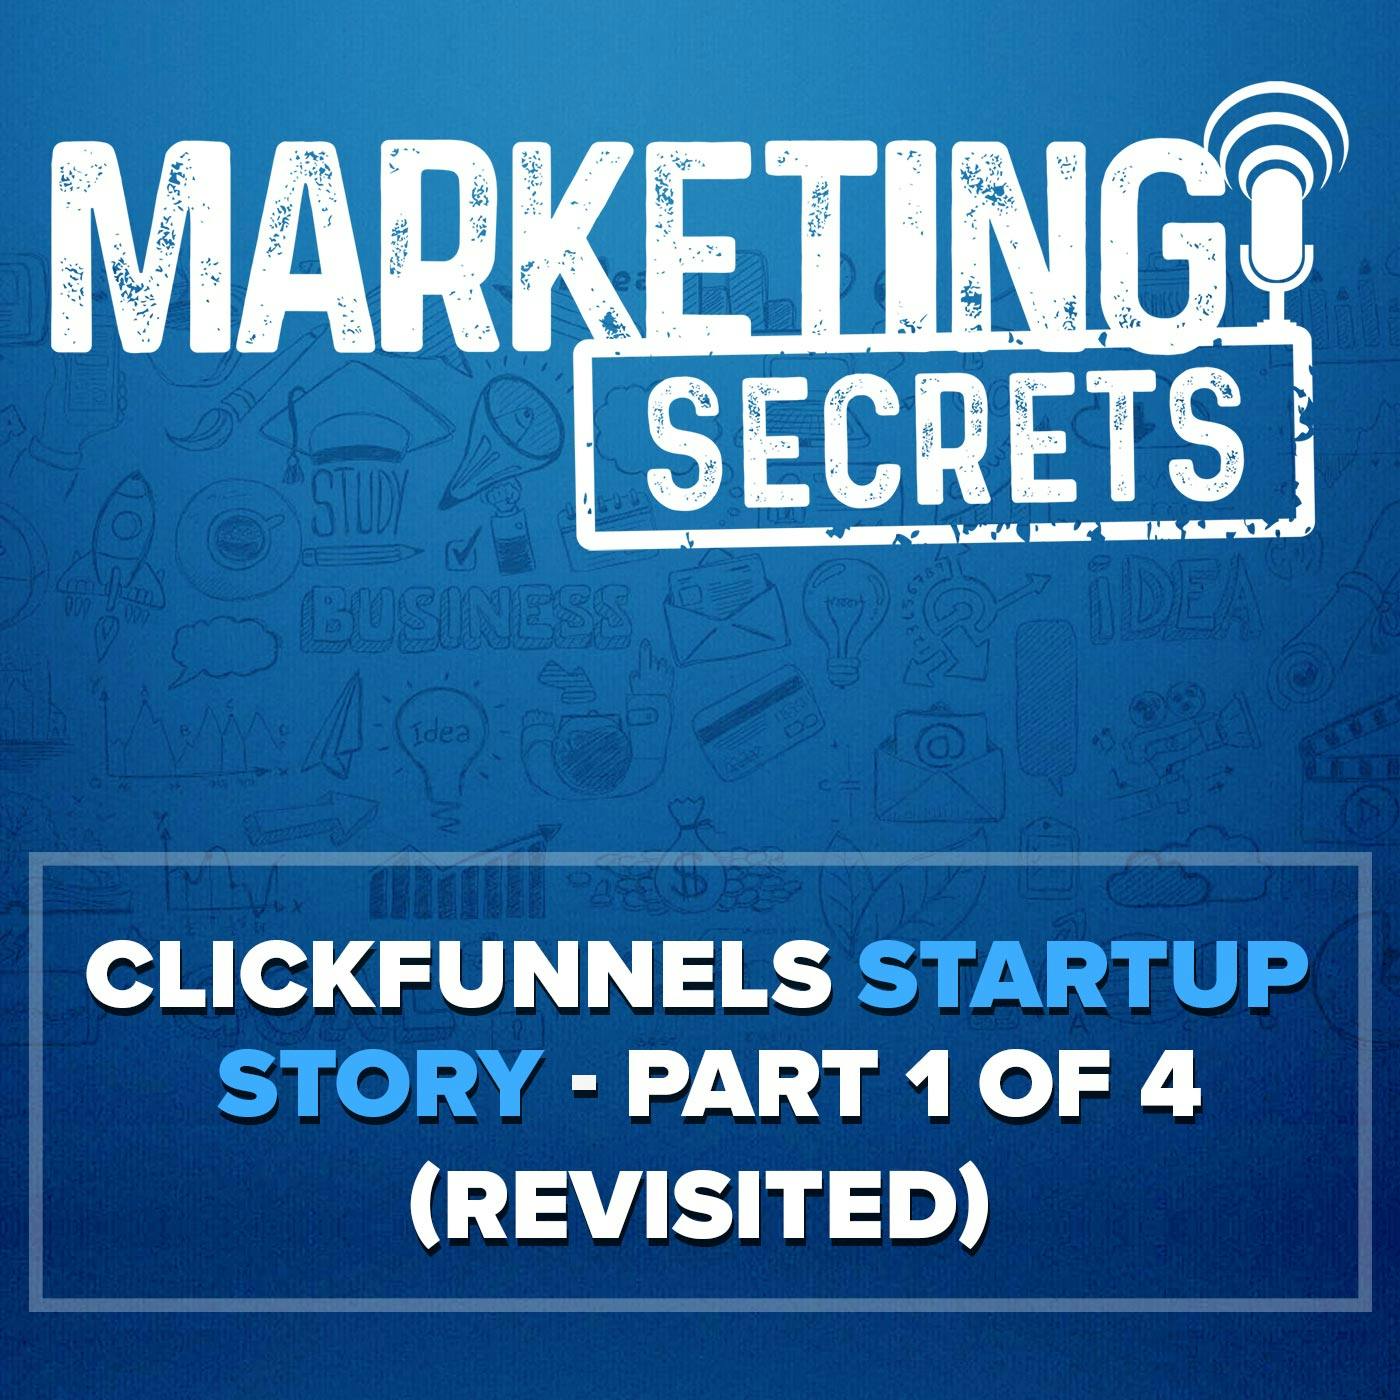 ClickFunnels Startup Story - Part 1 of 4 (Revisited!)